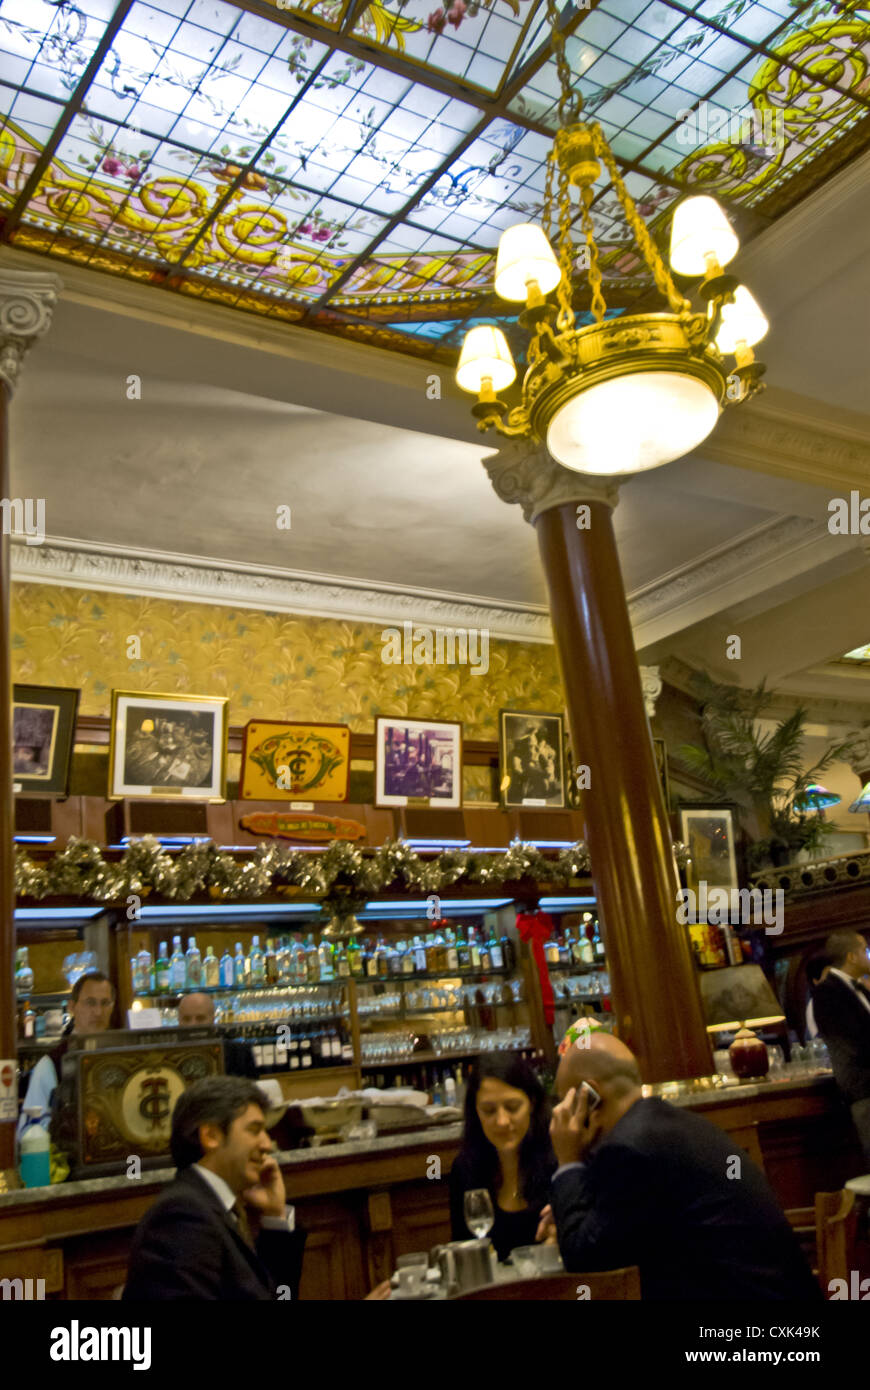 Cafe Tortoni, Buenos Aires, Argentina, South America Stock Photo